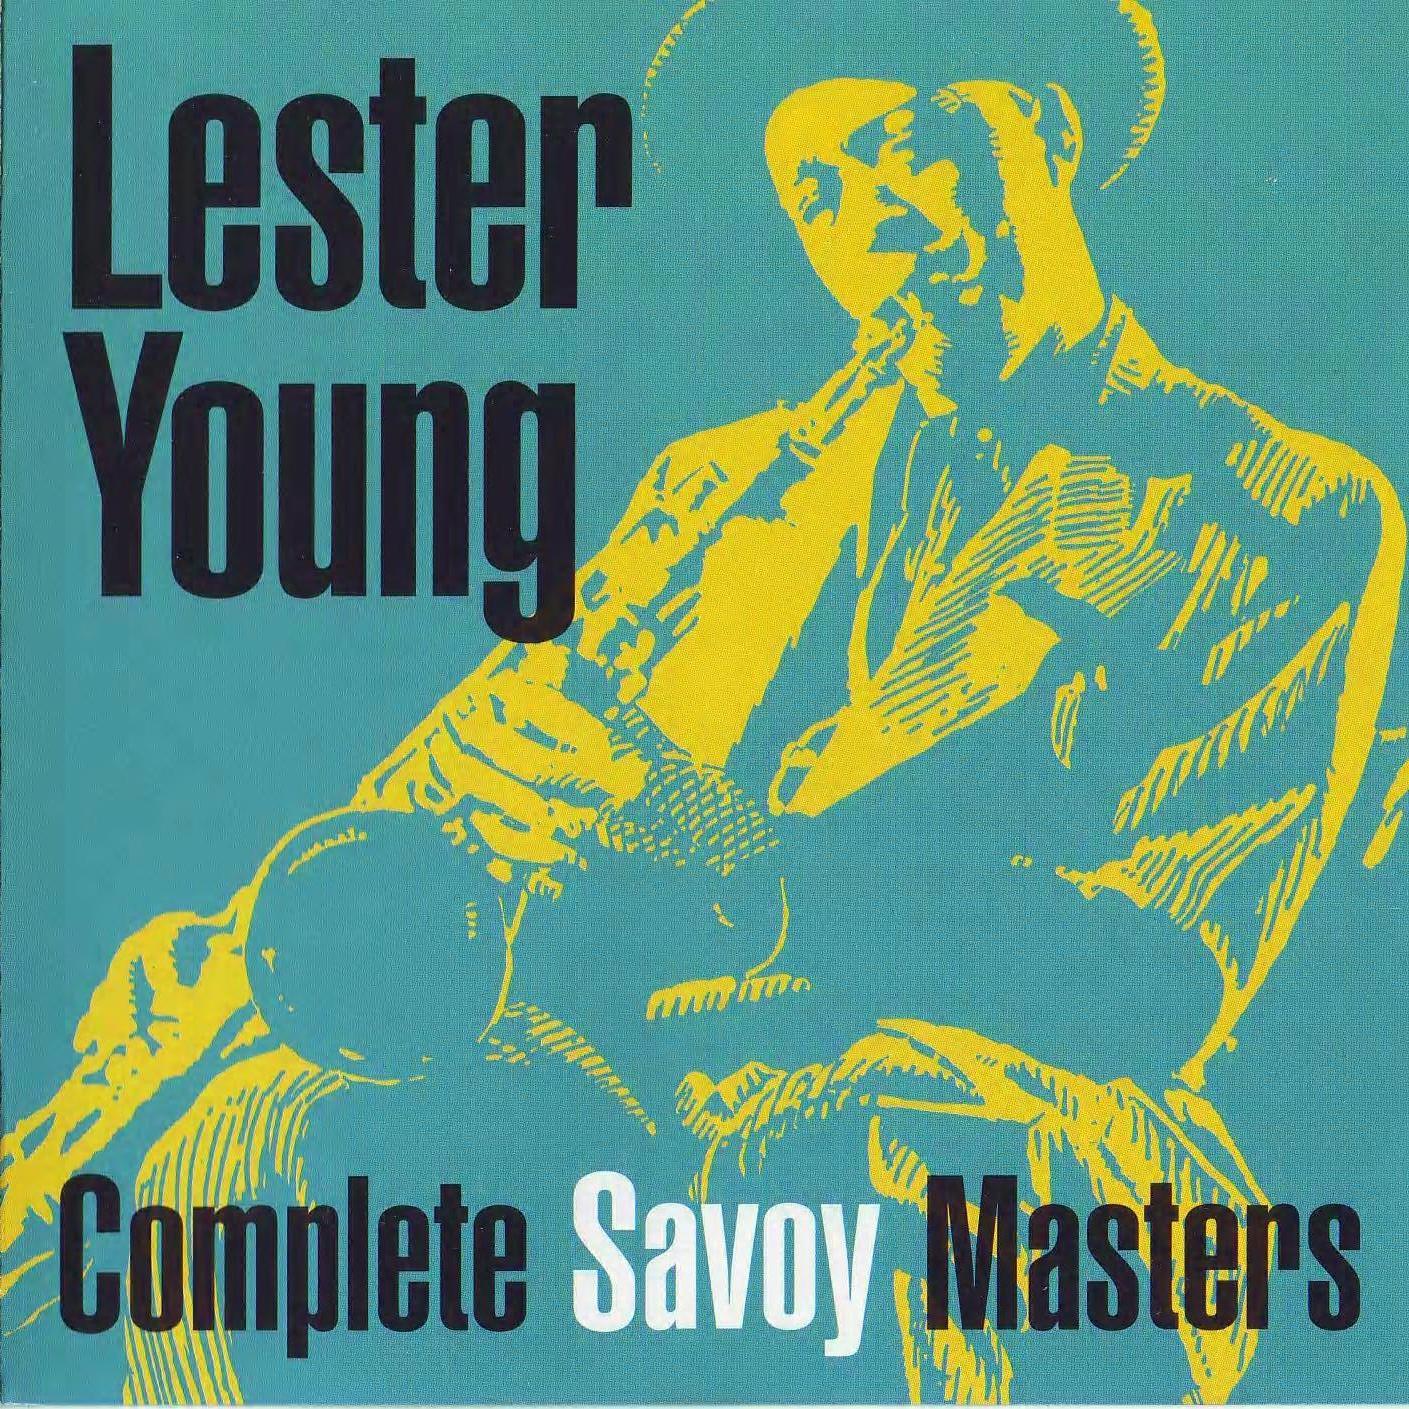 LESTER YOUNG - Complete Savoy Masters cover 